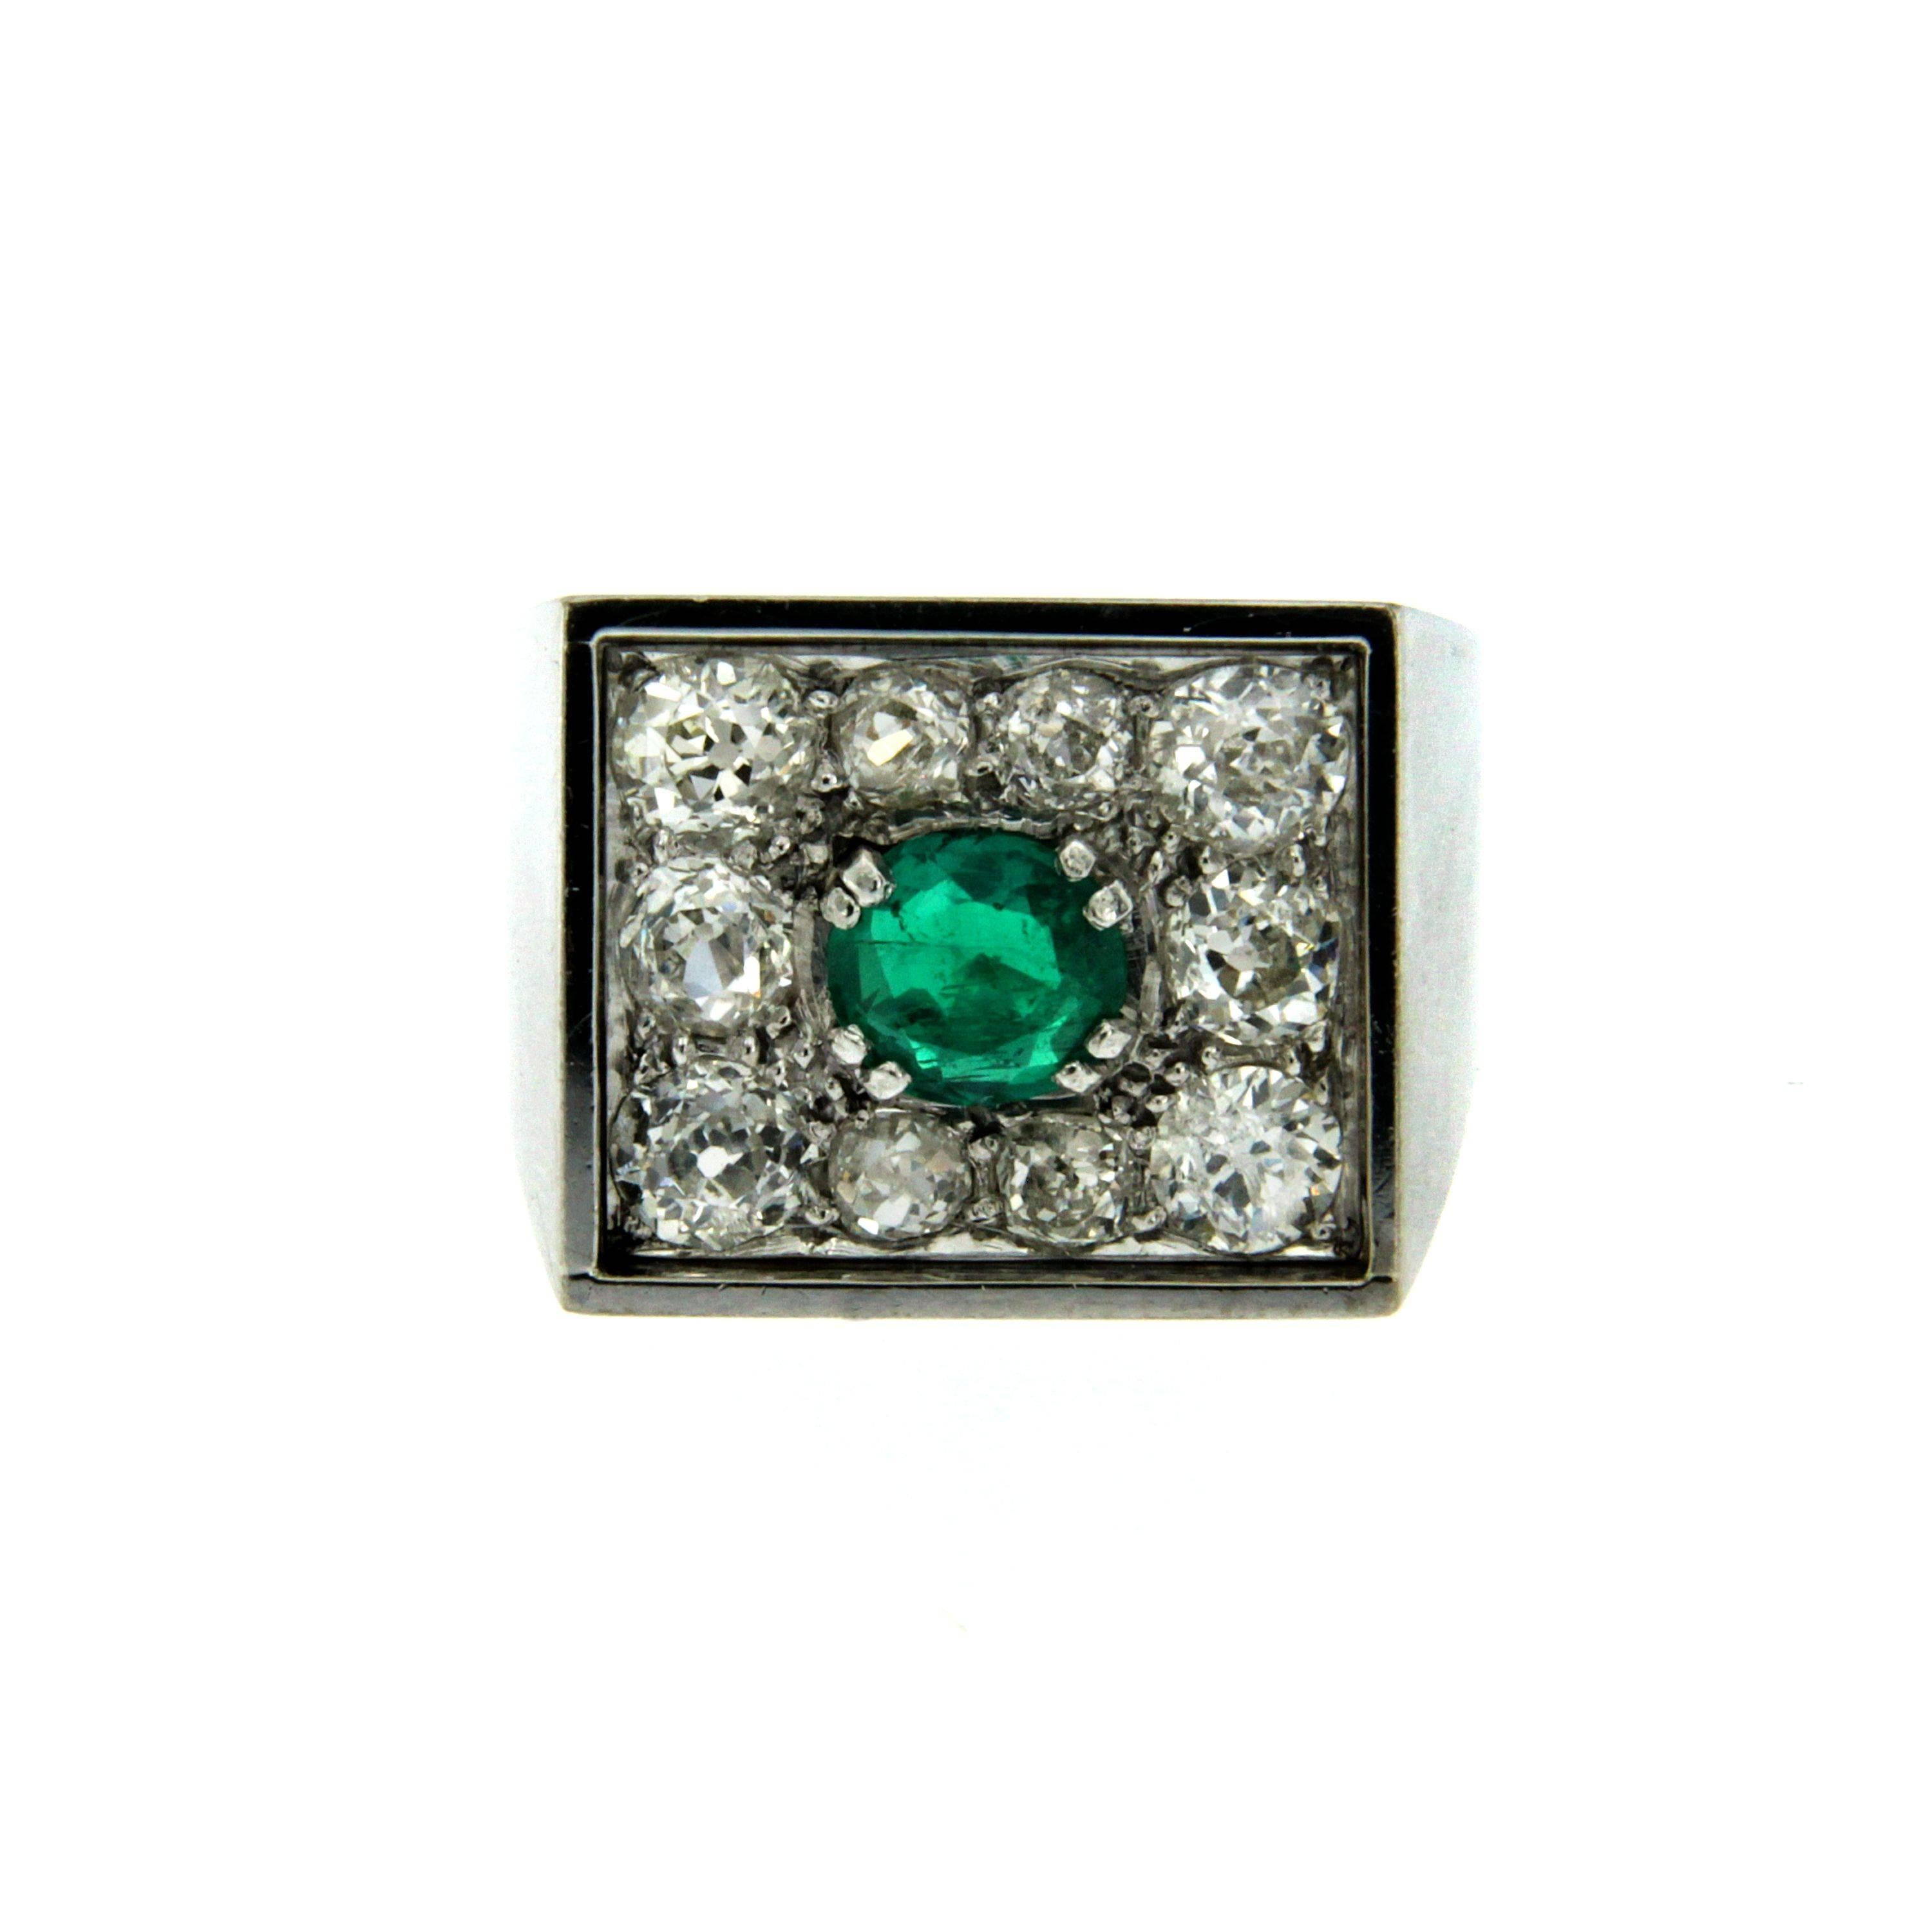 A diamond band ring set in Platinum. Origin England (signed and stamped inside the band)

The top of this ring is covered with a central of approx. 1.00 carat Colombian Emerald free of clarity enhancement and free of any treatment as oil or resin,